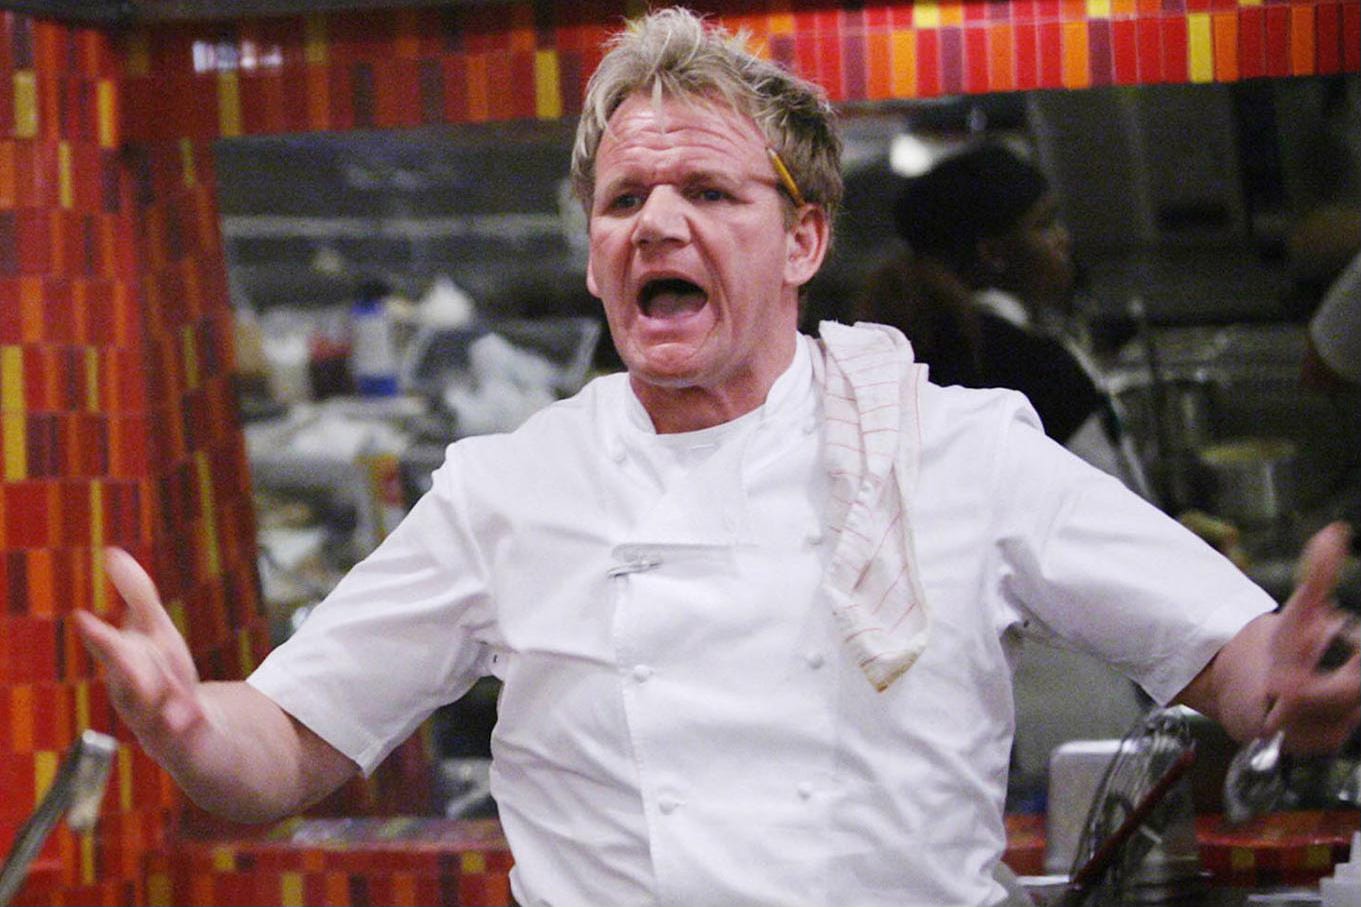 Gordon Ramsay in chef's whites, yelling something profane with his arms wide in disbelief.